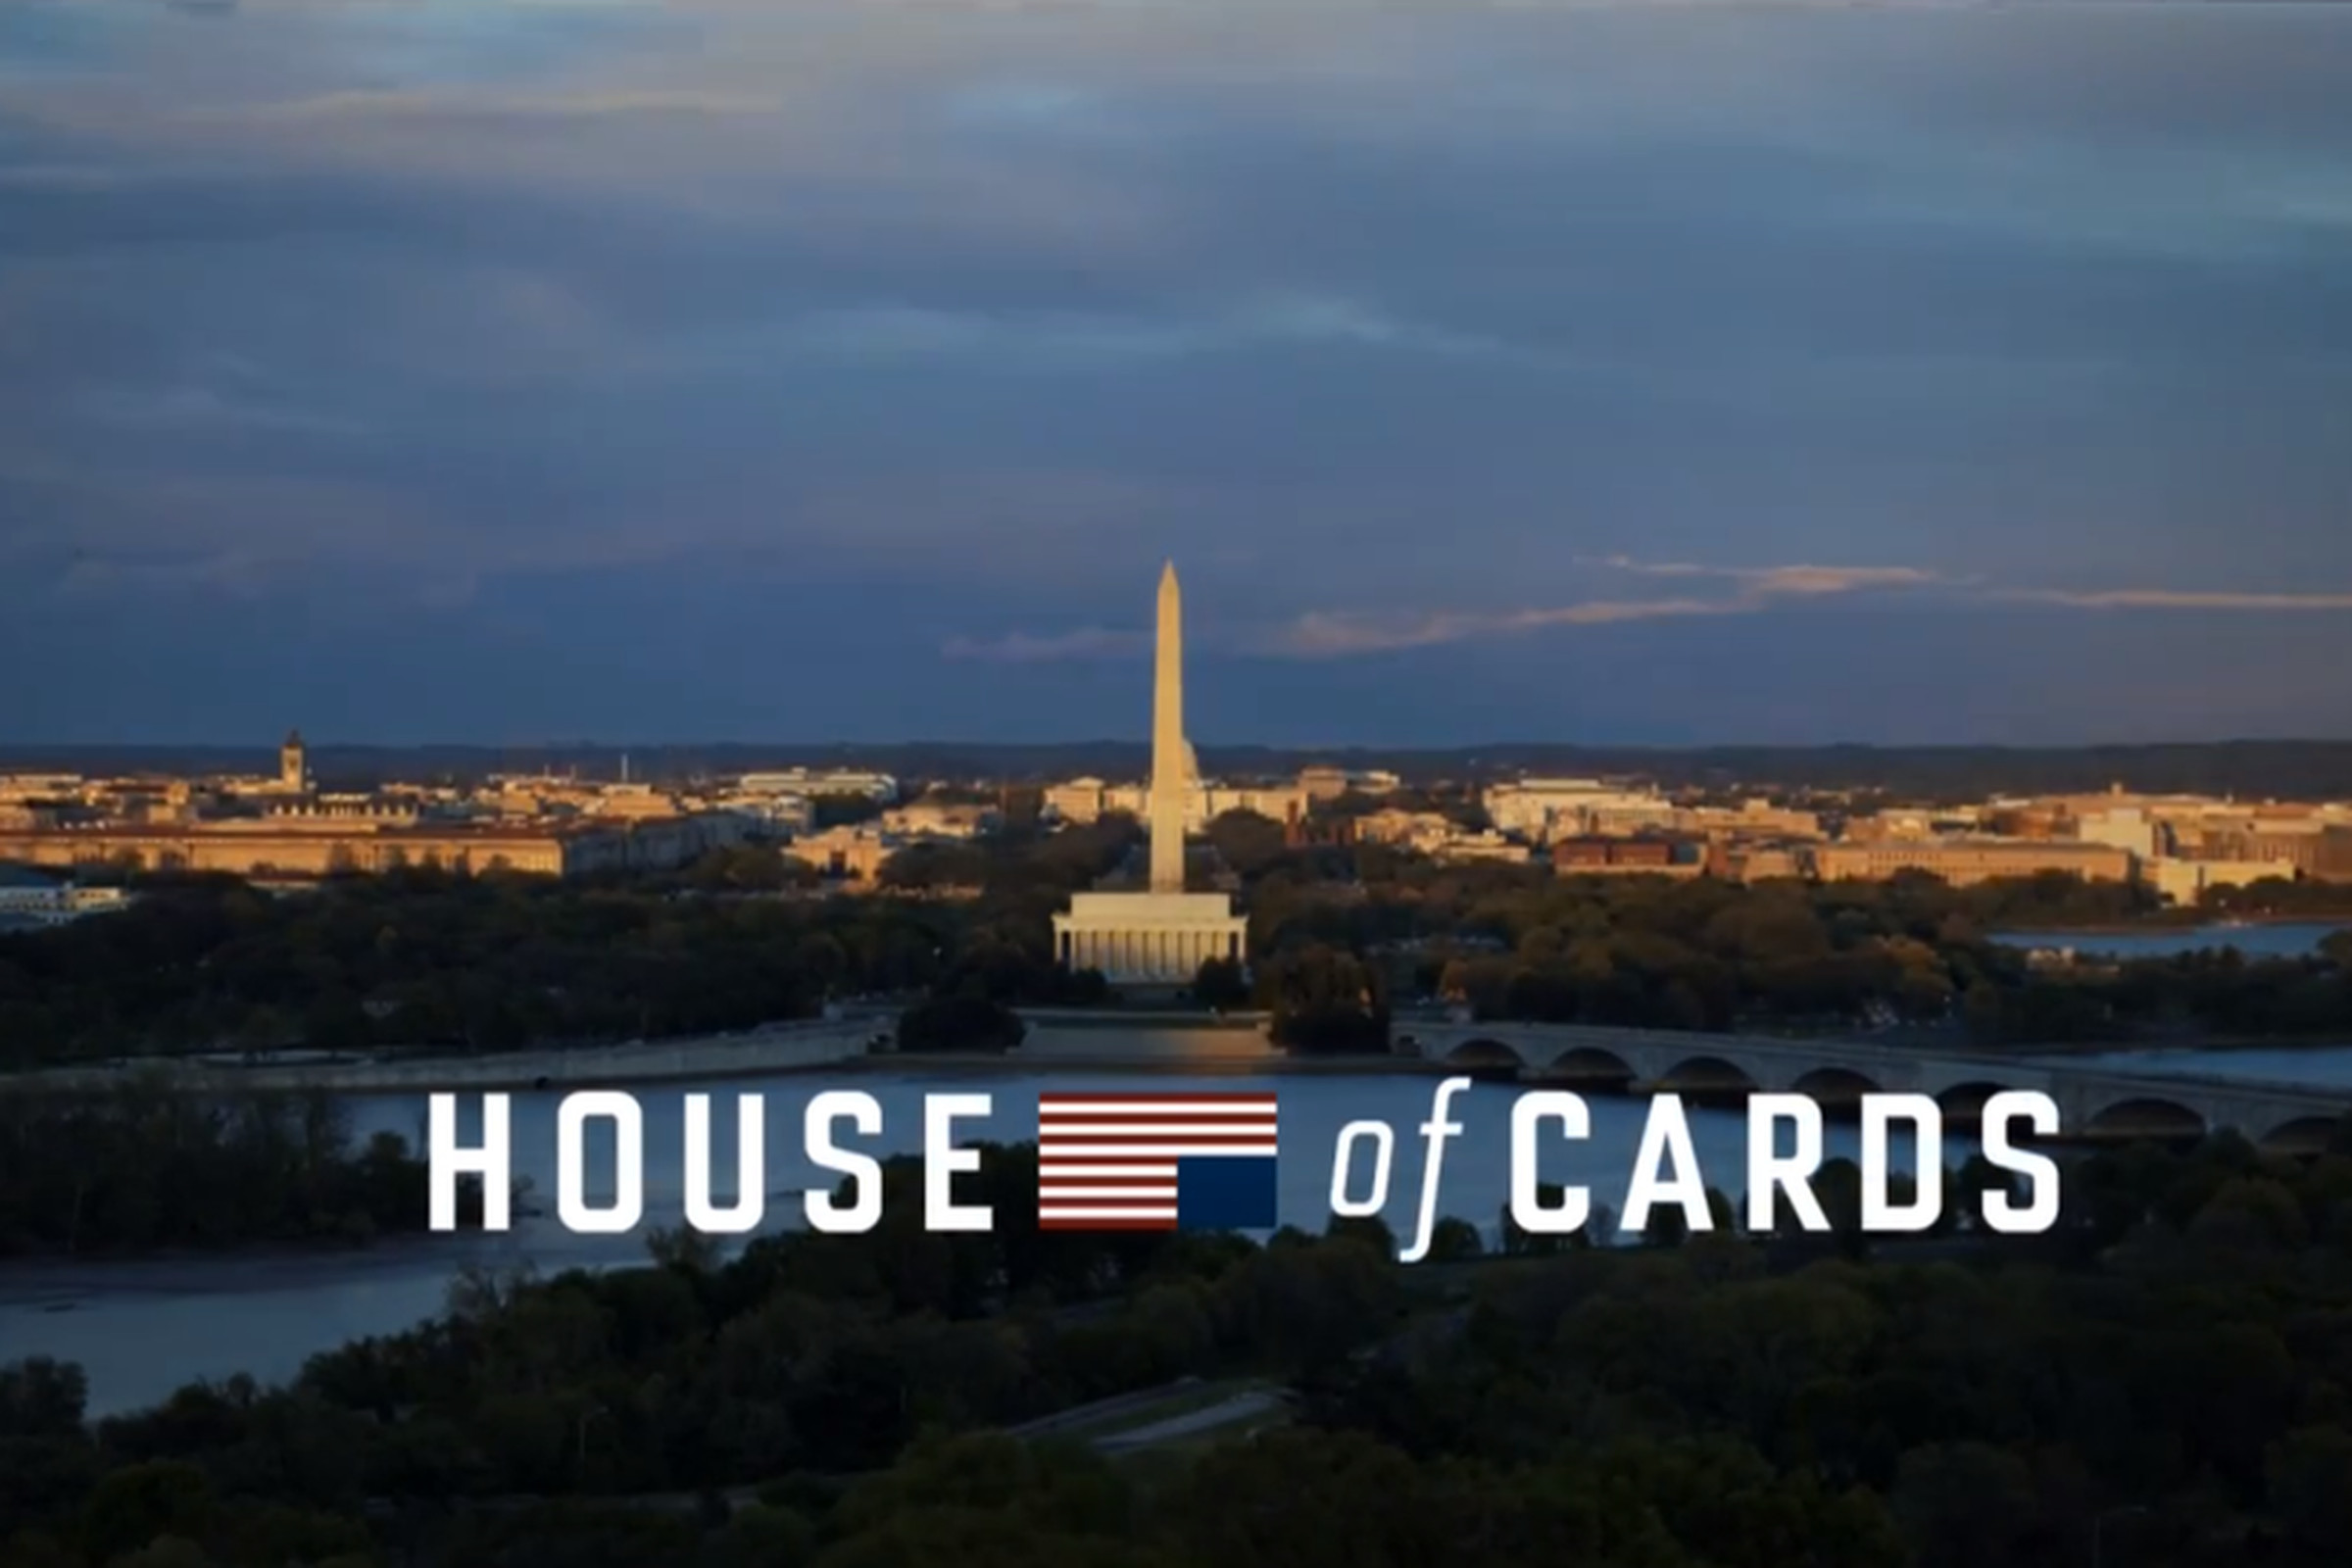 House of Cards title shot